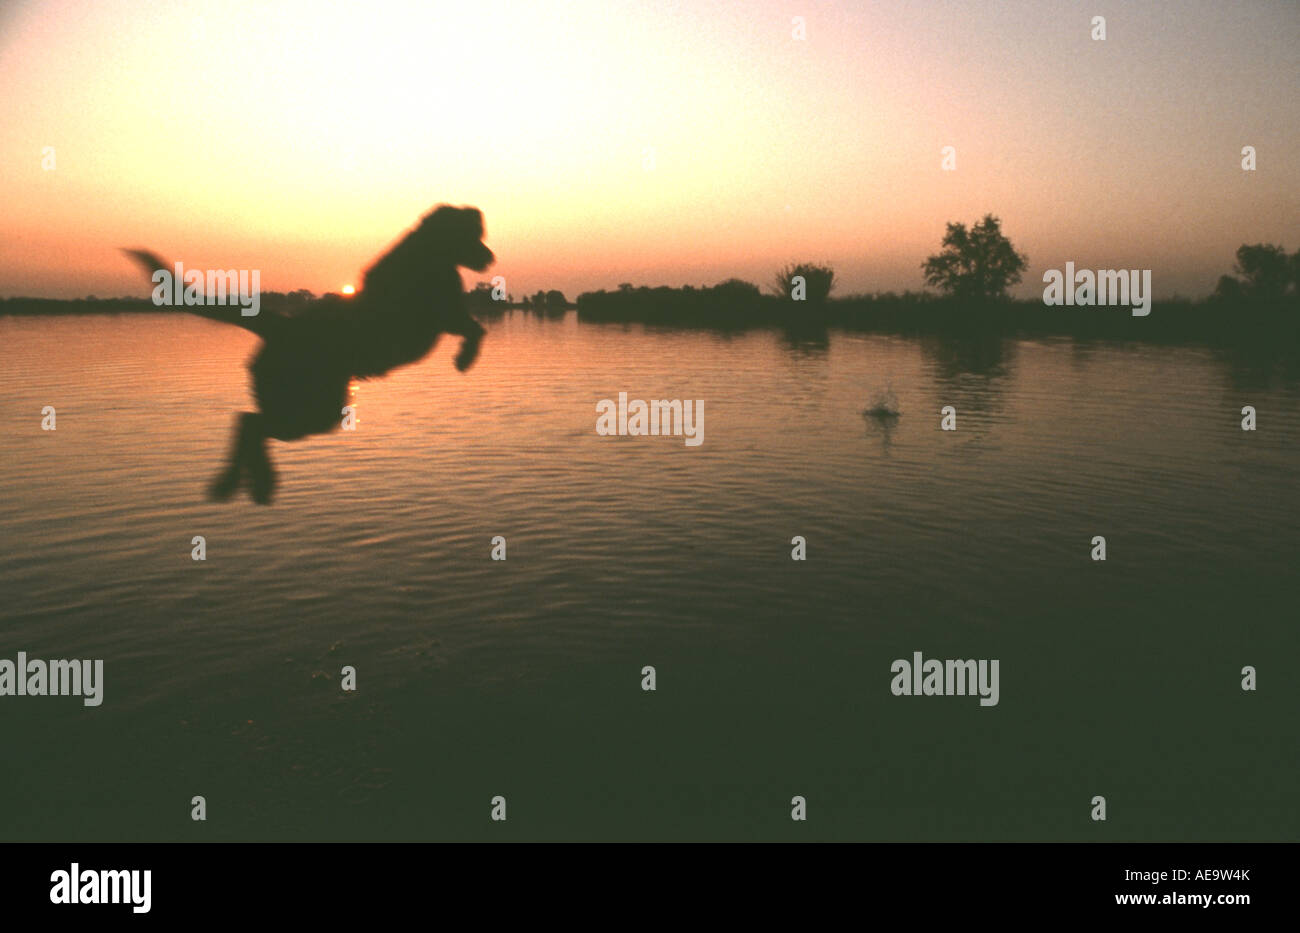 At sunset, a black lab jumps into the lake to retrieve a duck. Stock Photo